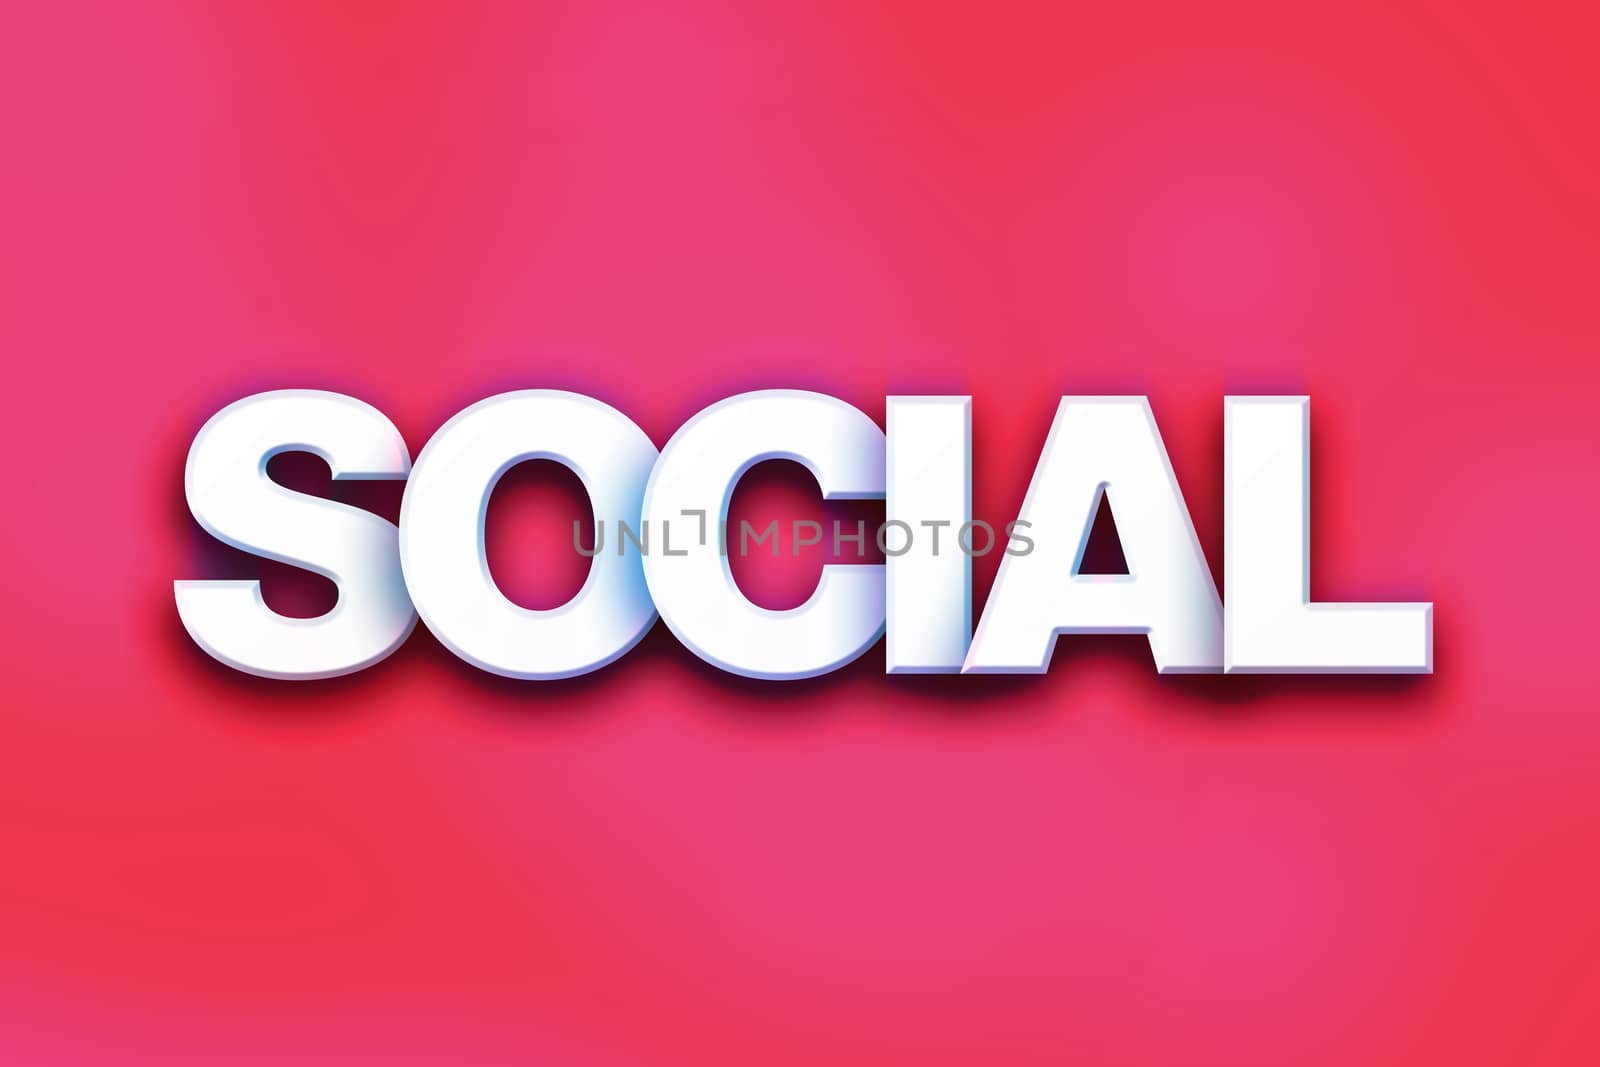 The word "Social" written in white 3D letters on a colorful background concept and theme.